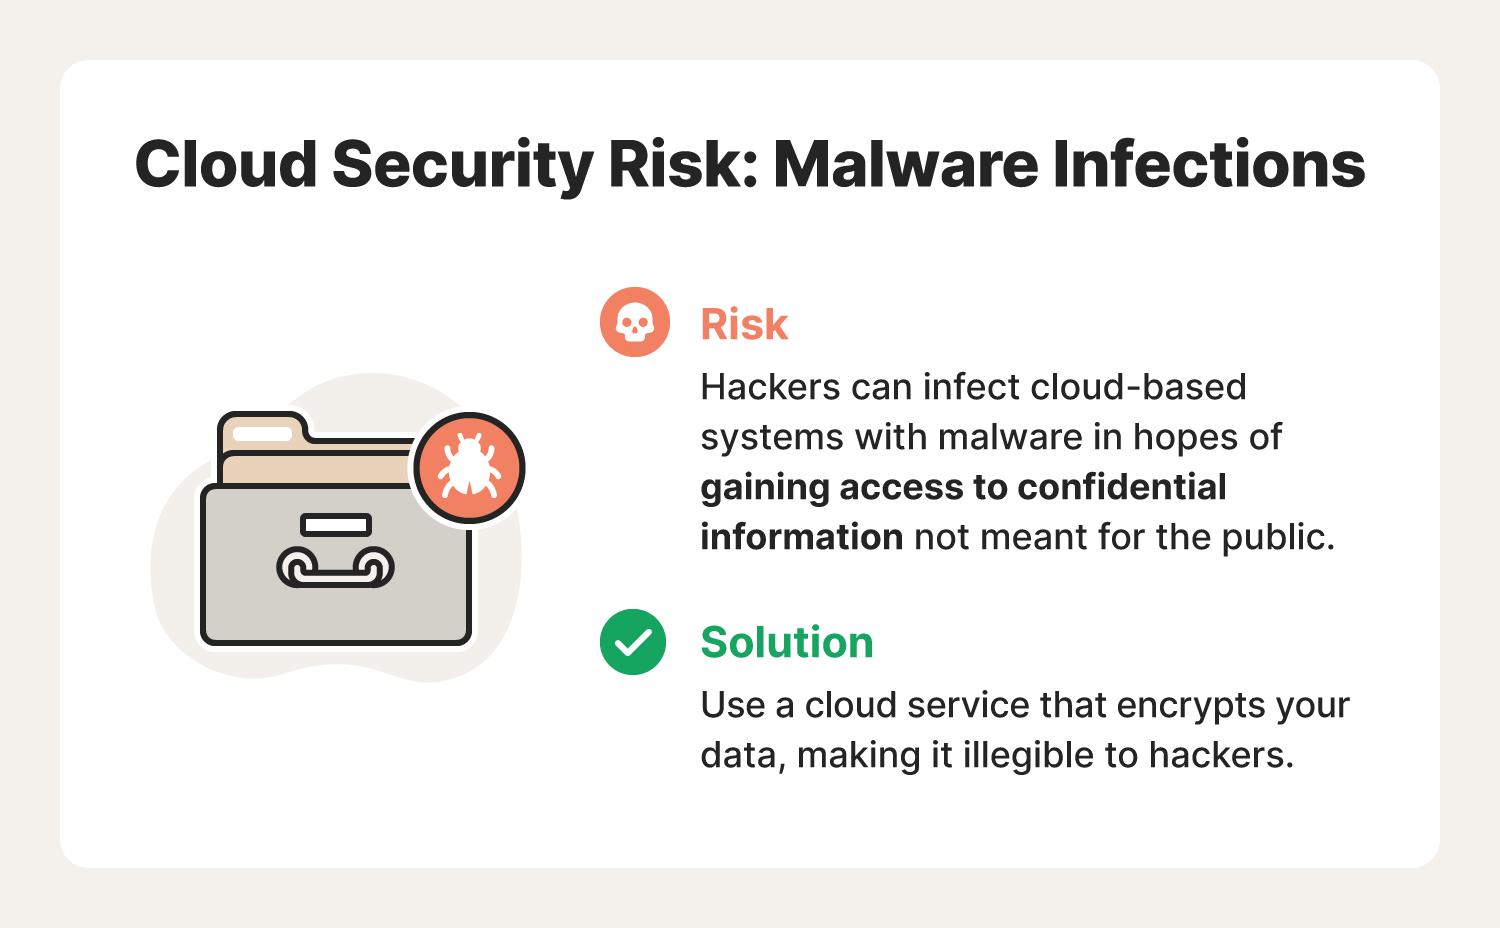 A graphic showcases malware infection risks and solutions.